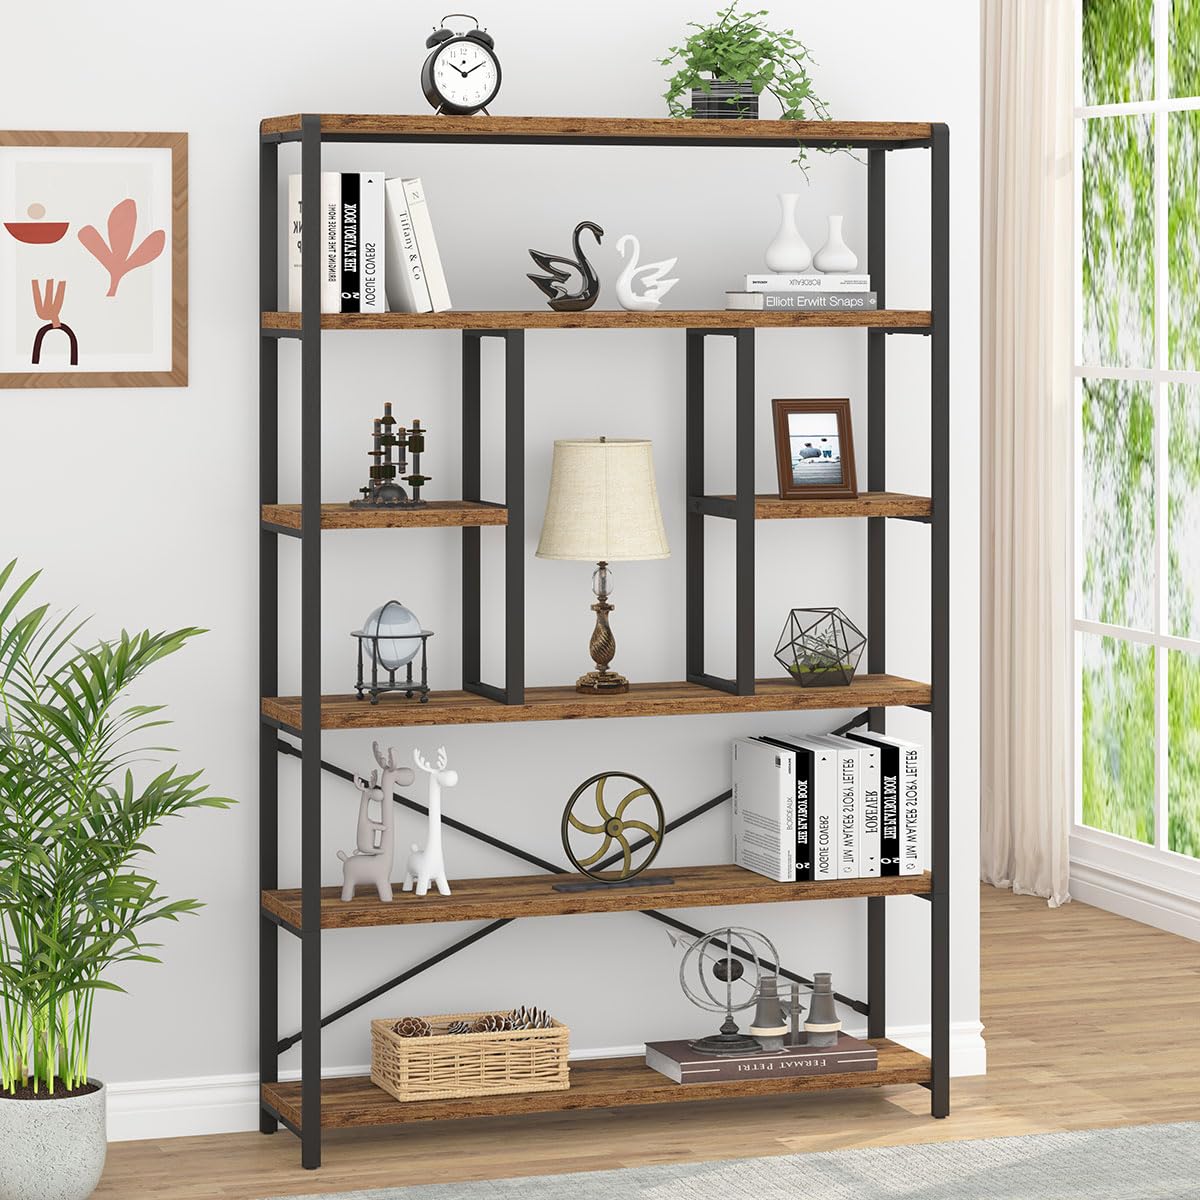 LVB Rustic Bookcases and Book Shelves, Metal Wood 6 Tier Bookshelf and Book Rack Storage, Industrial Vertical Display Etagere Book Case 6 Shelf,